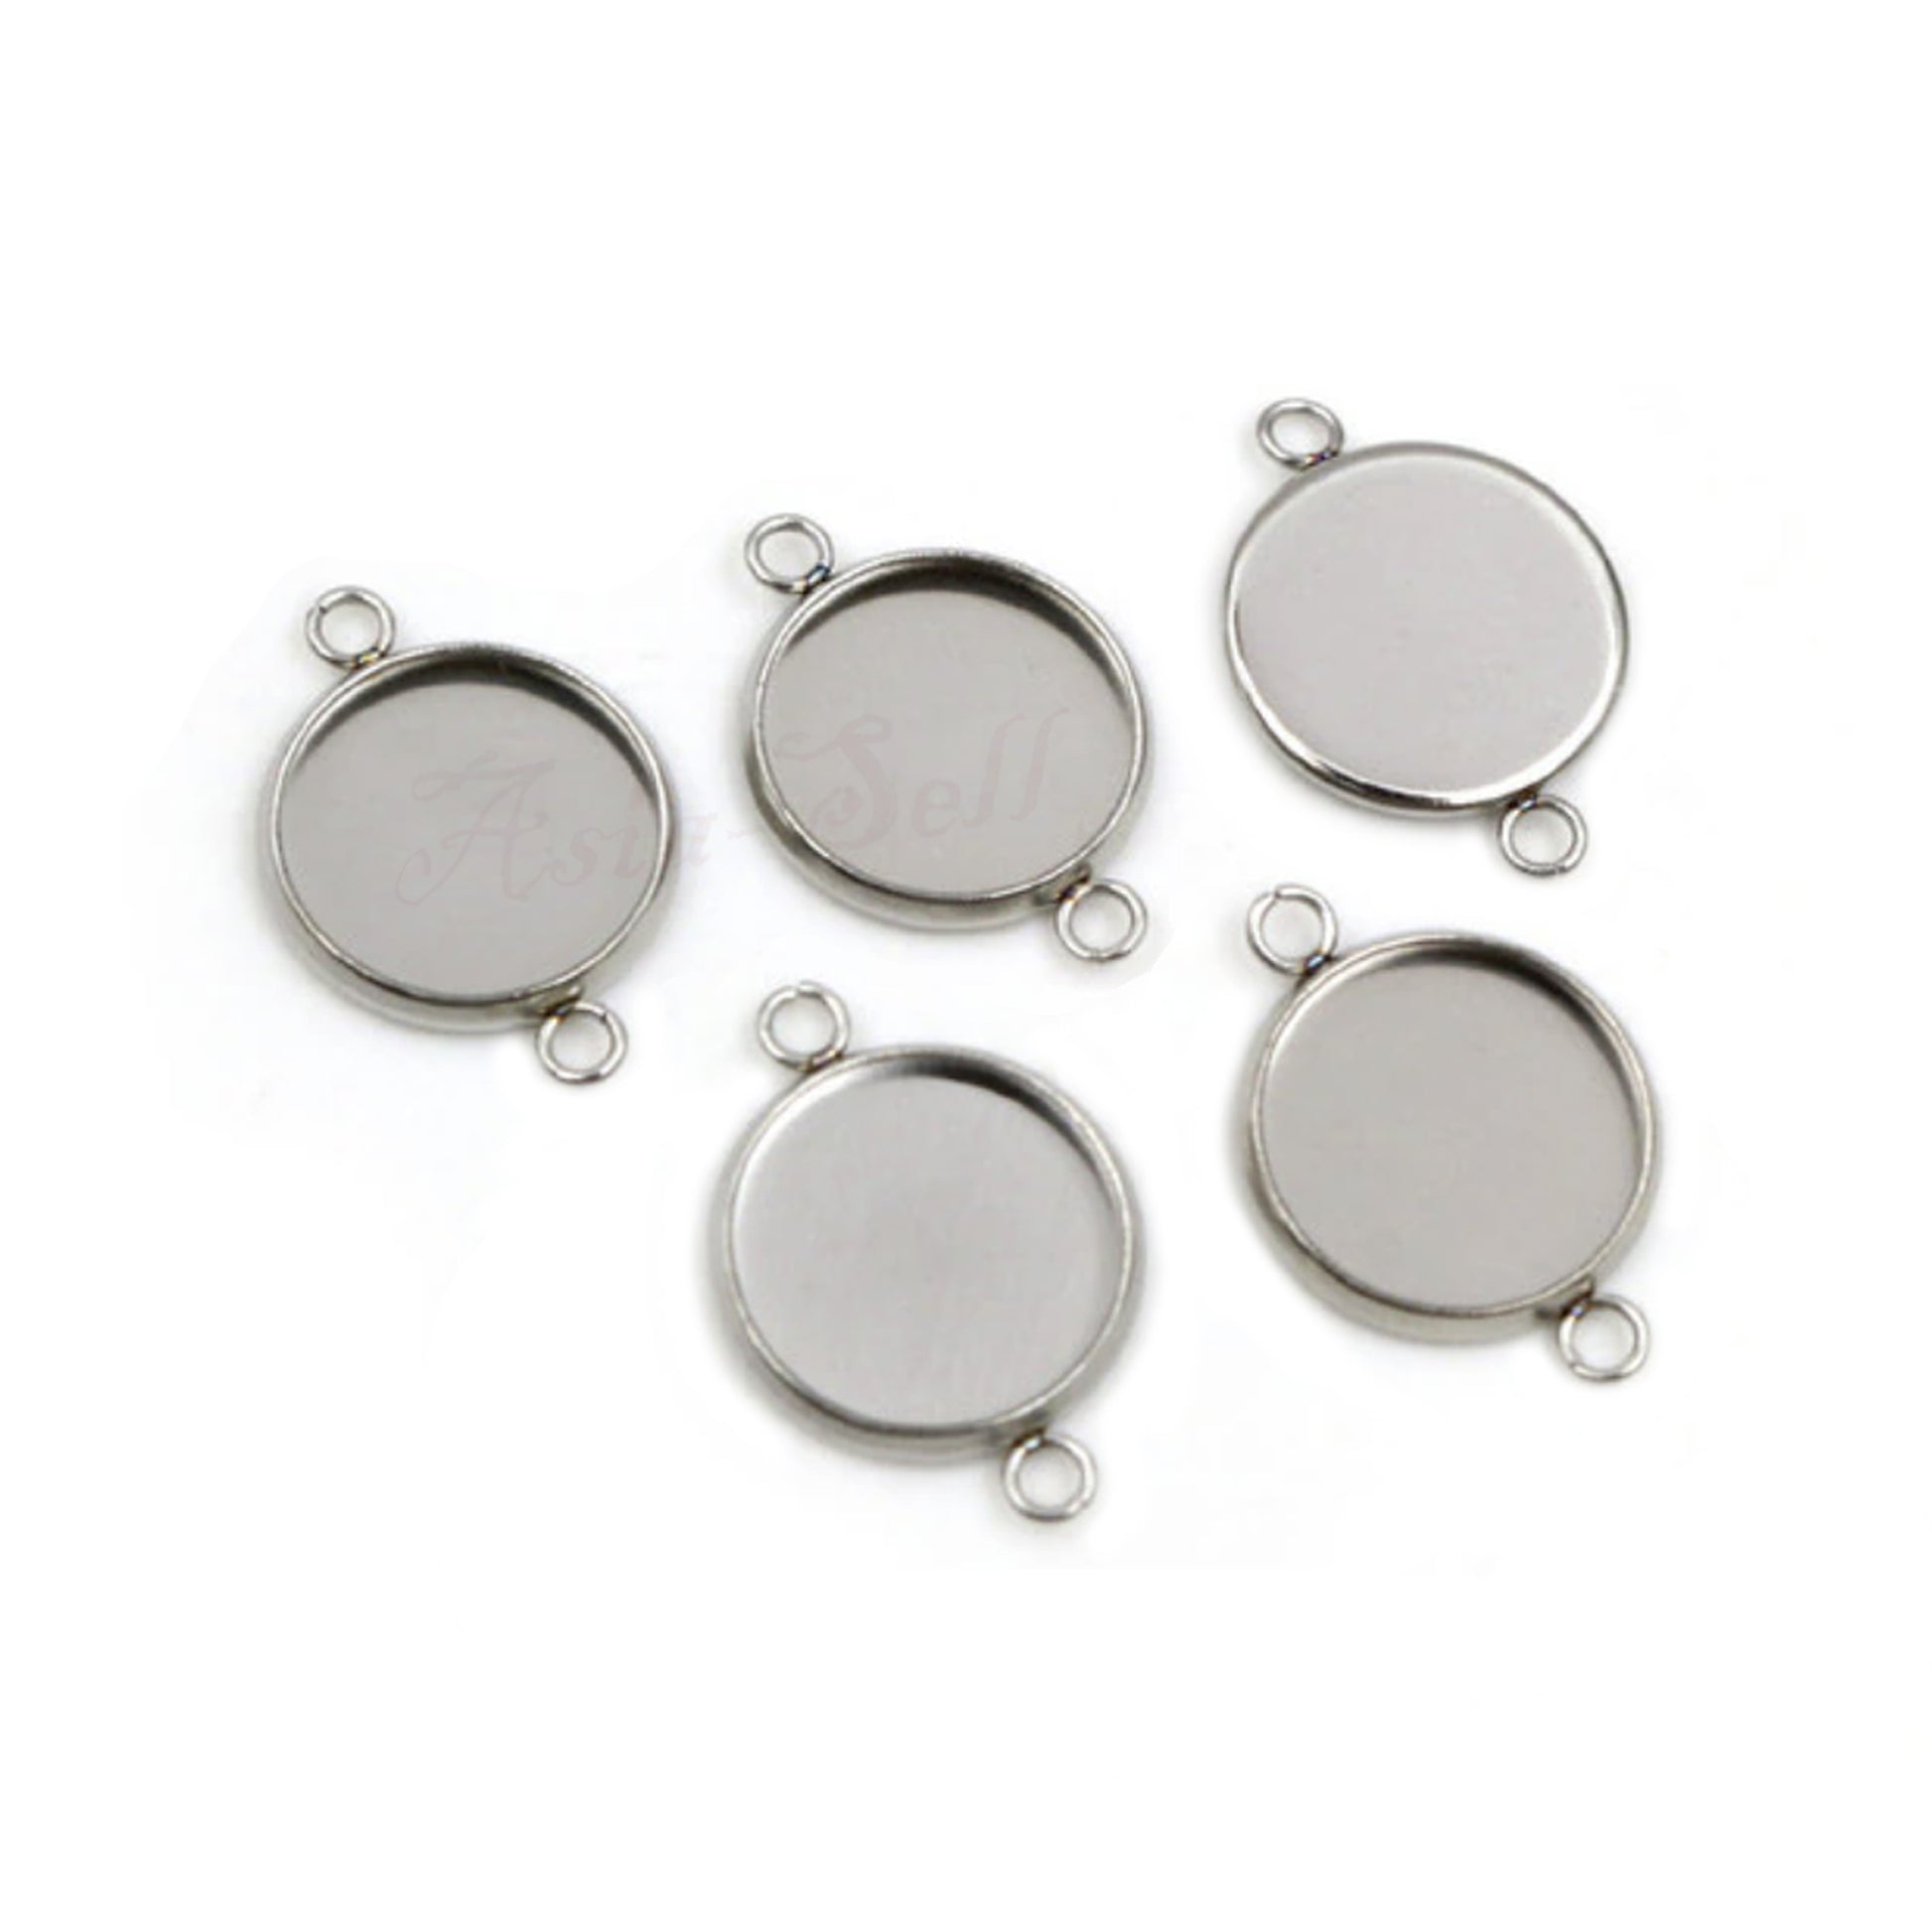 5pcs Cabochon Bases 12mm Stainless Steel Charms Pendant Single Loop Double Loop